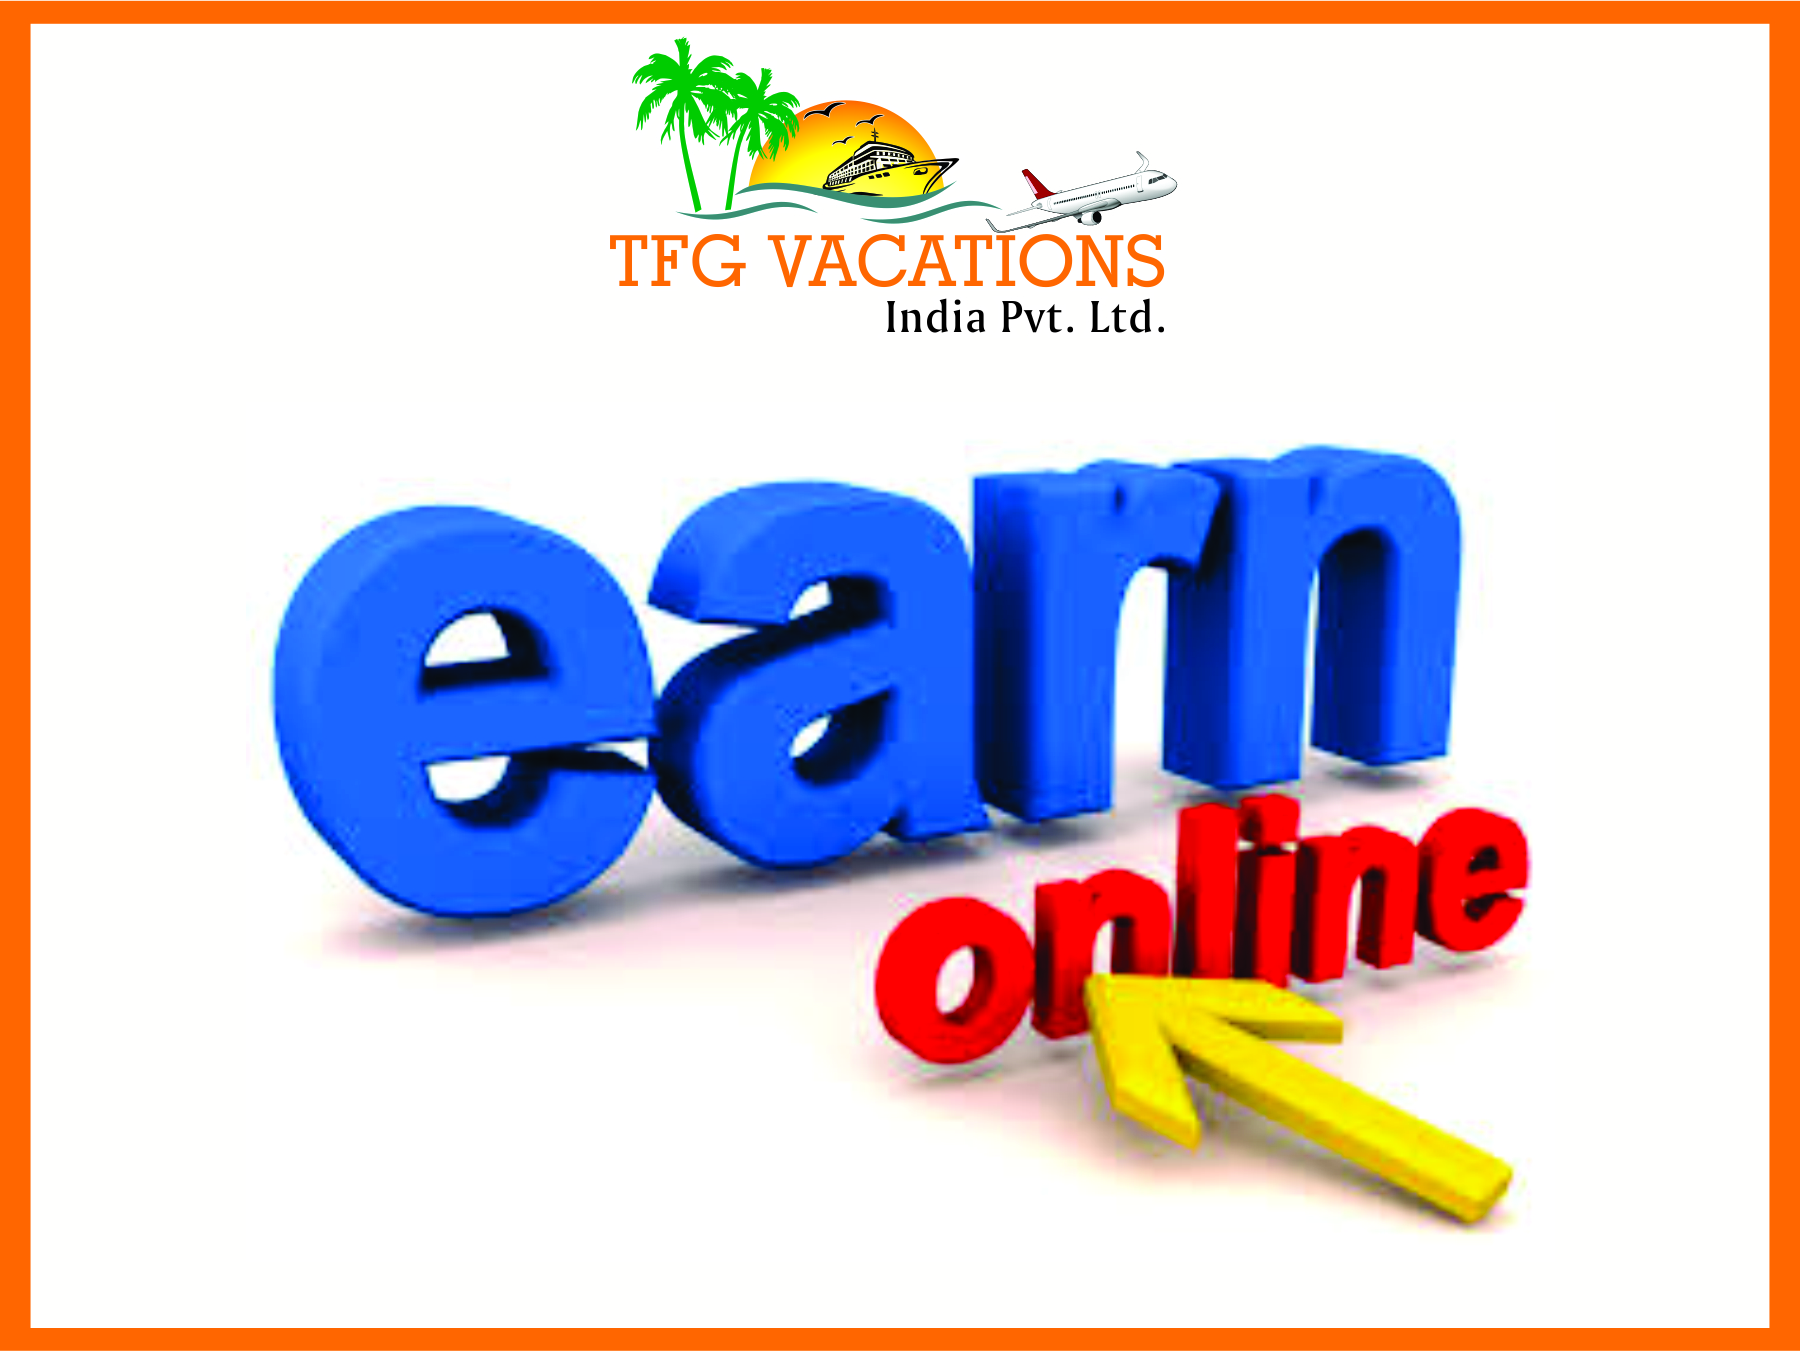 SPEND 2-3 HOURS AND EARN A HUGE INCOME UPTO 7000 PER WEEK,Diu,Jobs,Bpo & Telecaller,77traders